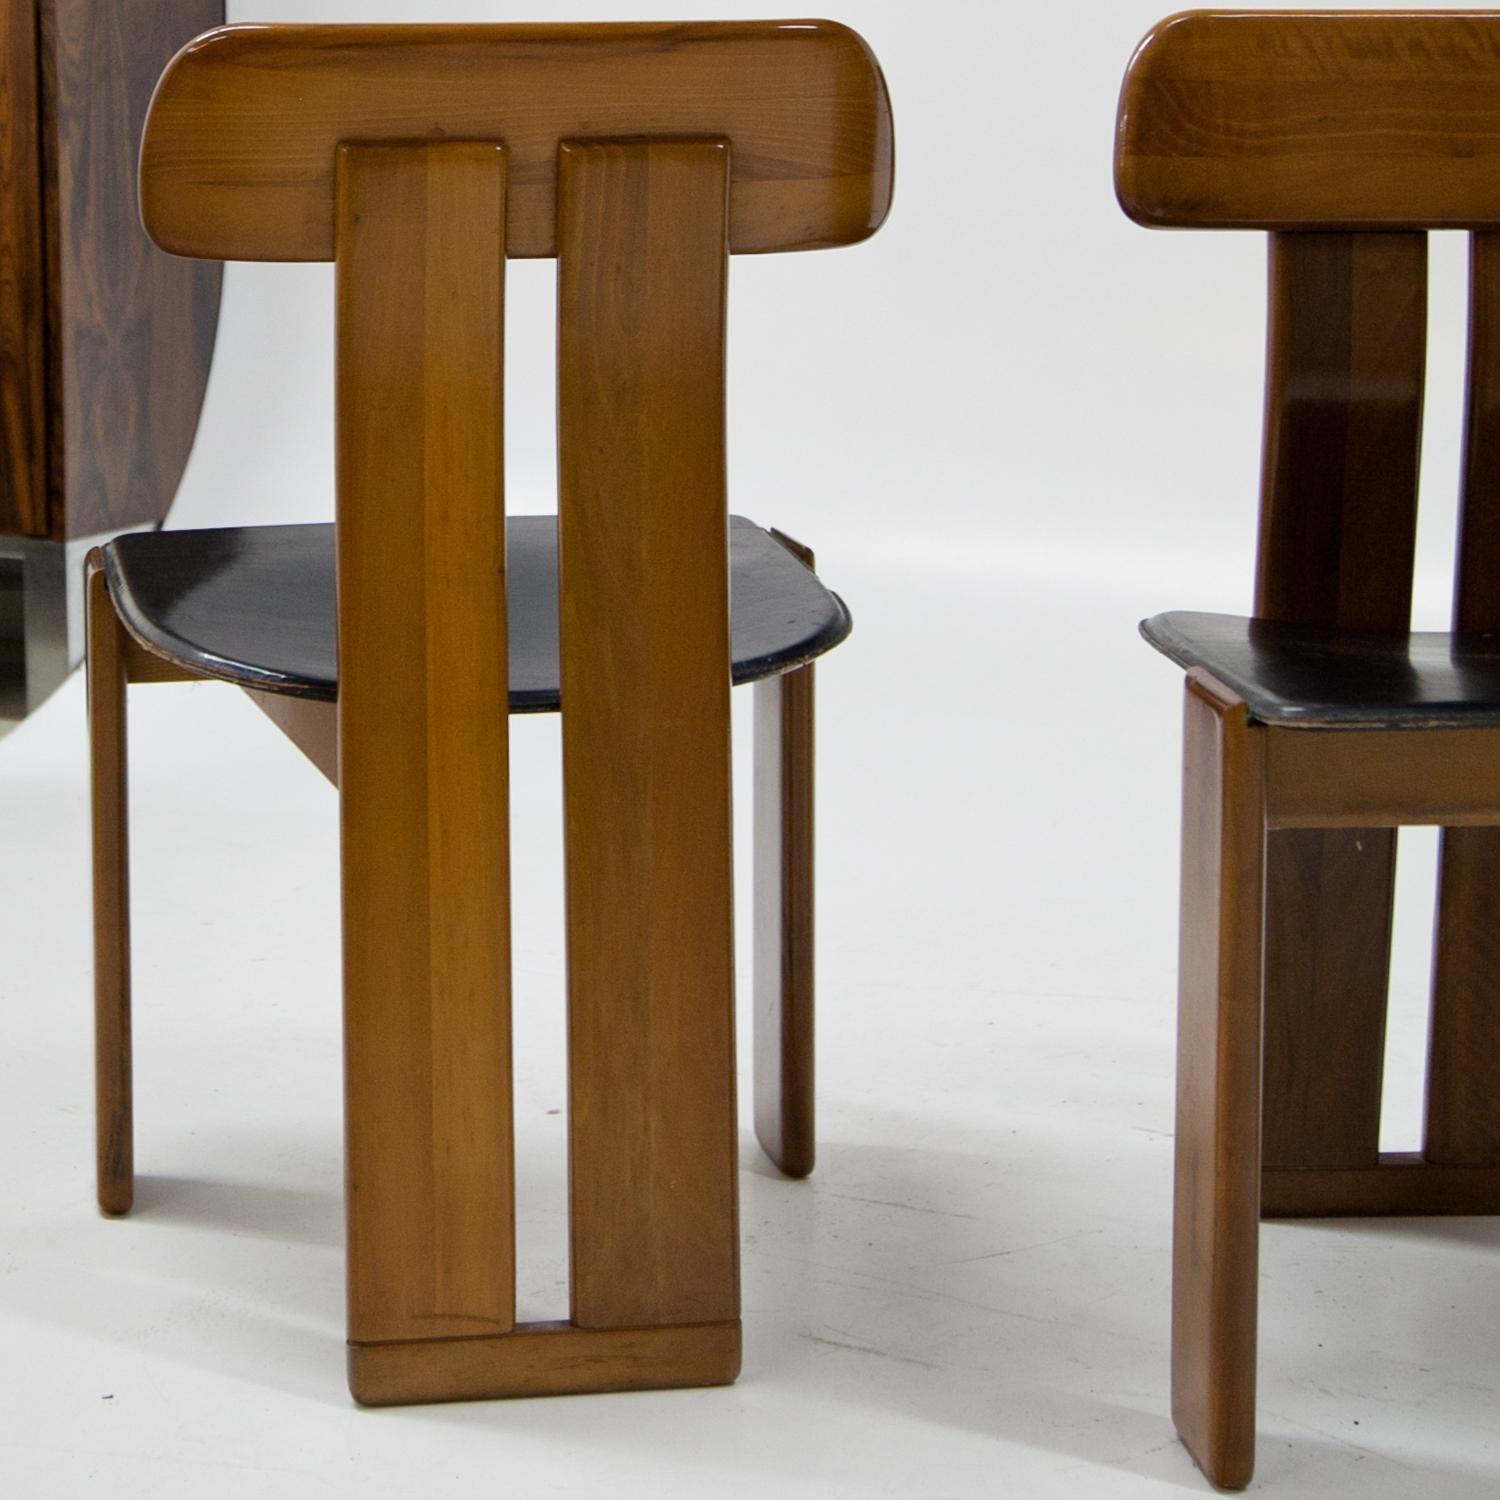 Four Chairs, Attributed to Afra & Tobia Scarpa for Maxalto, Italy, 1970s (Italienisch)